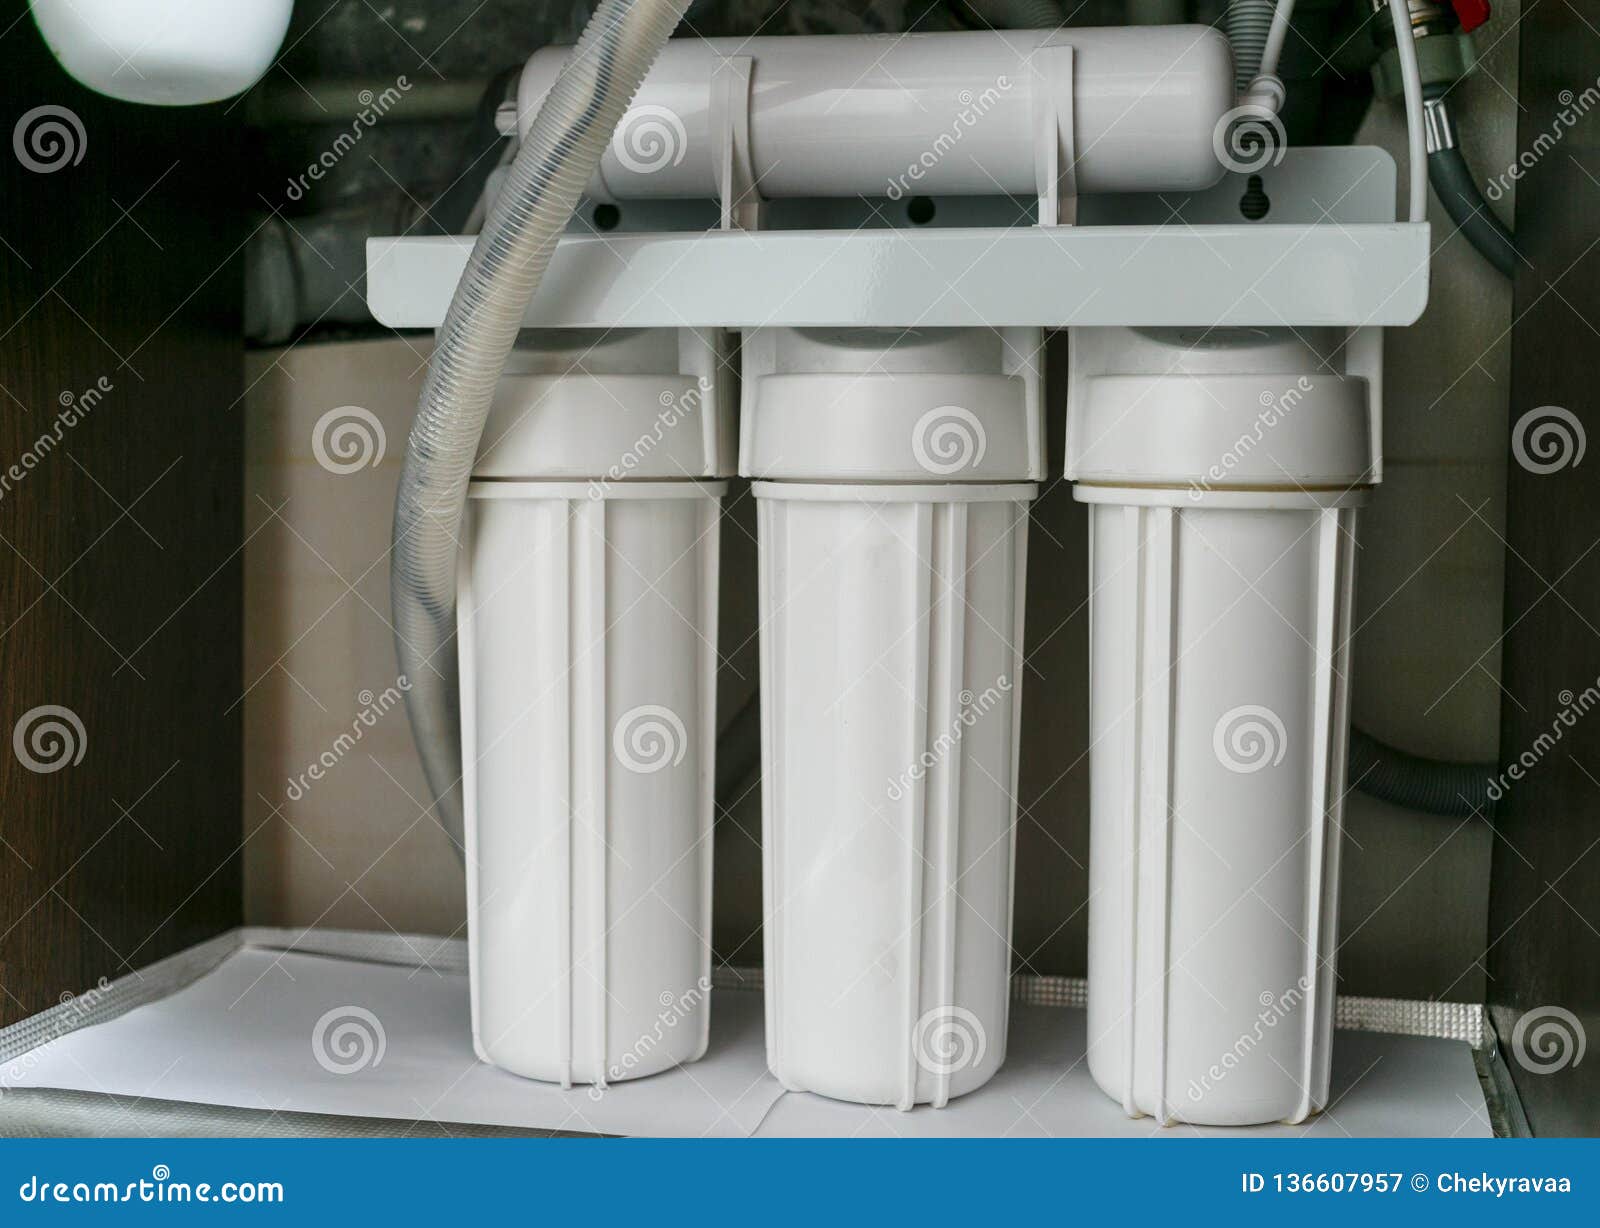 Reverse Osmosis Water Purification System At Home